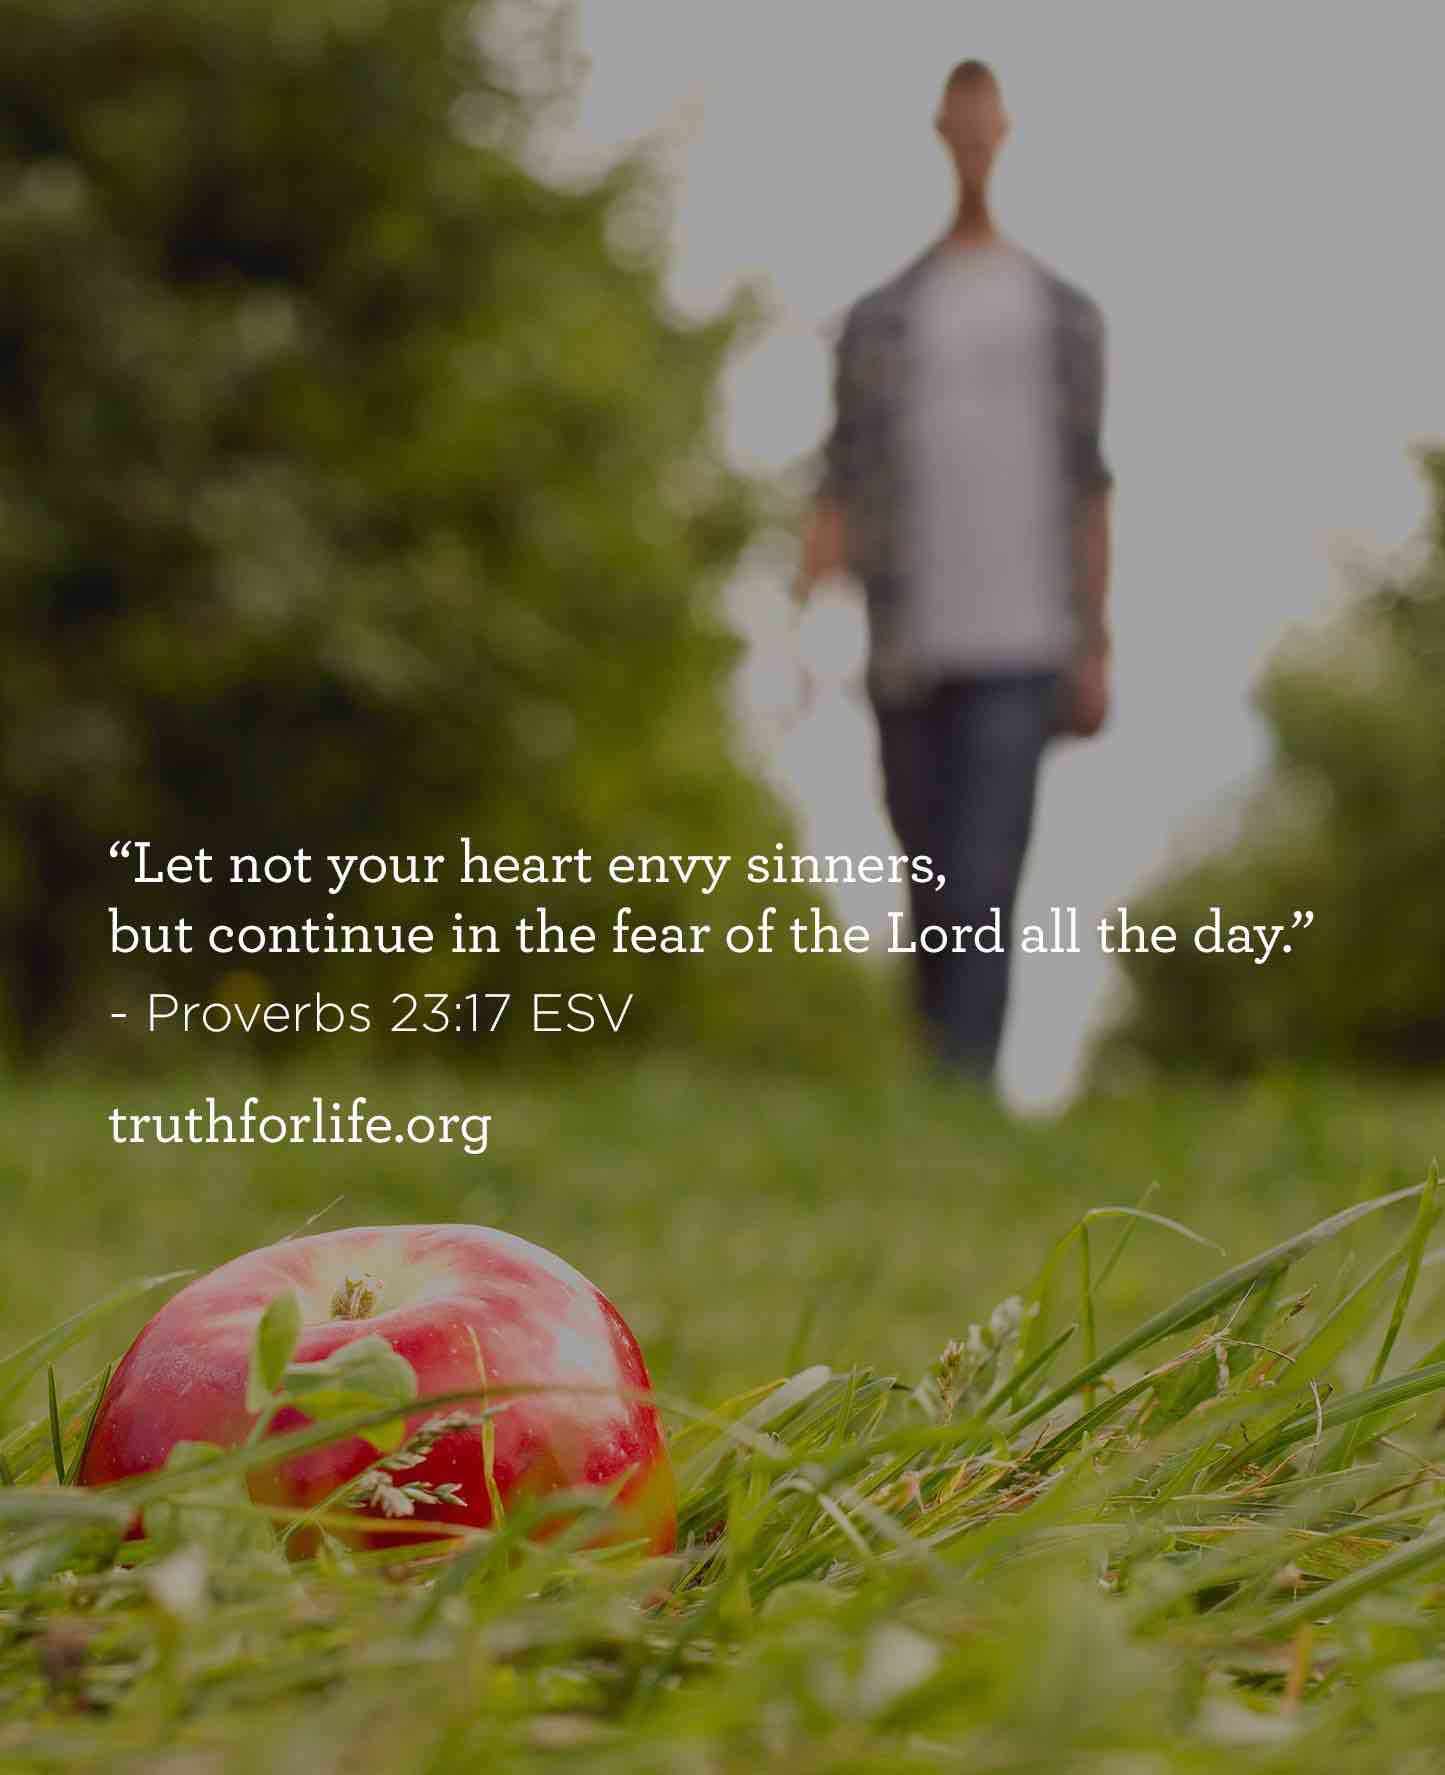 thumbnail image for Let not your heart envy sinners, but continue in the fear of the Lord